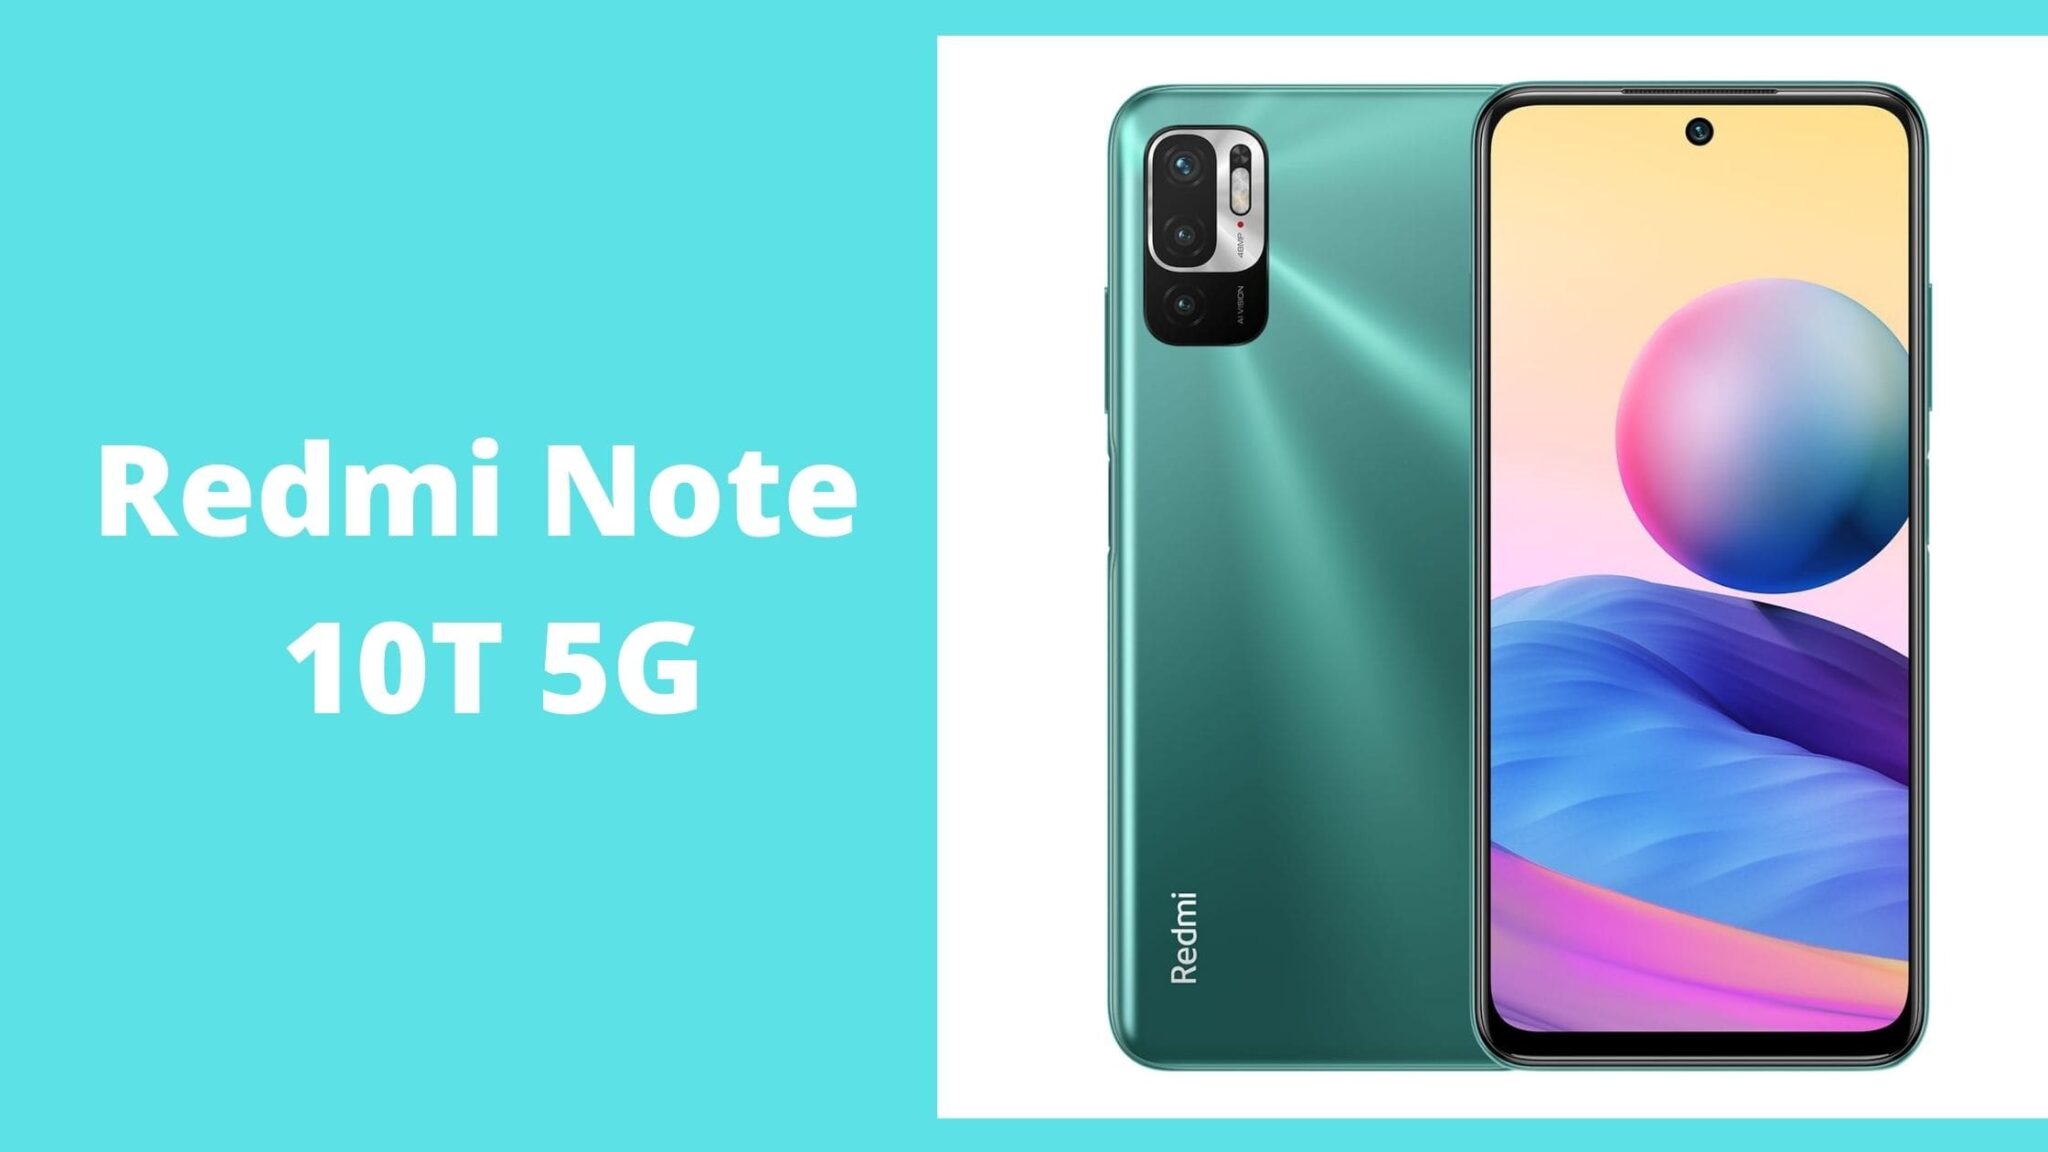 Redmi Note 10T 5G, Check Price, Specification & Features.